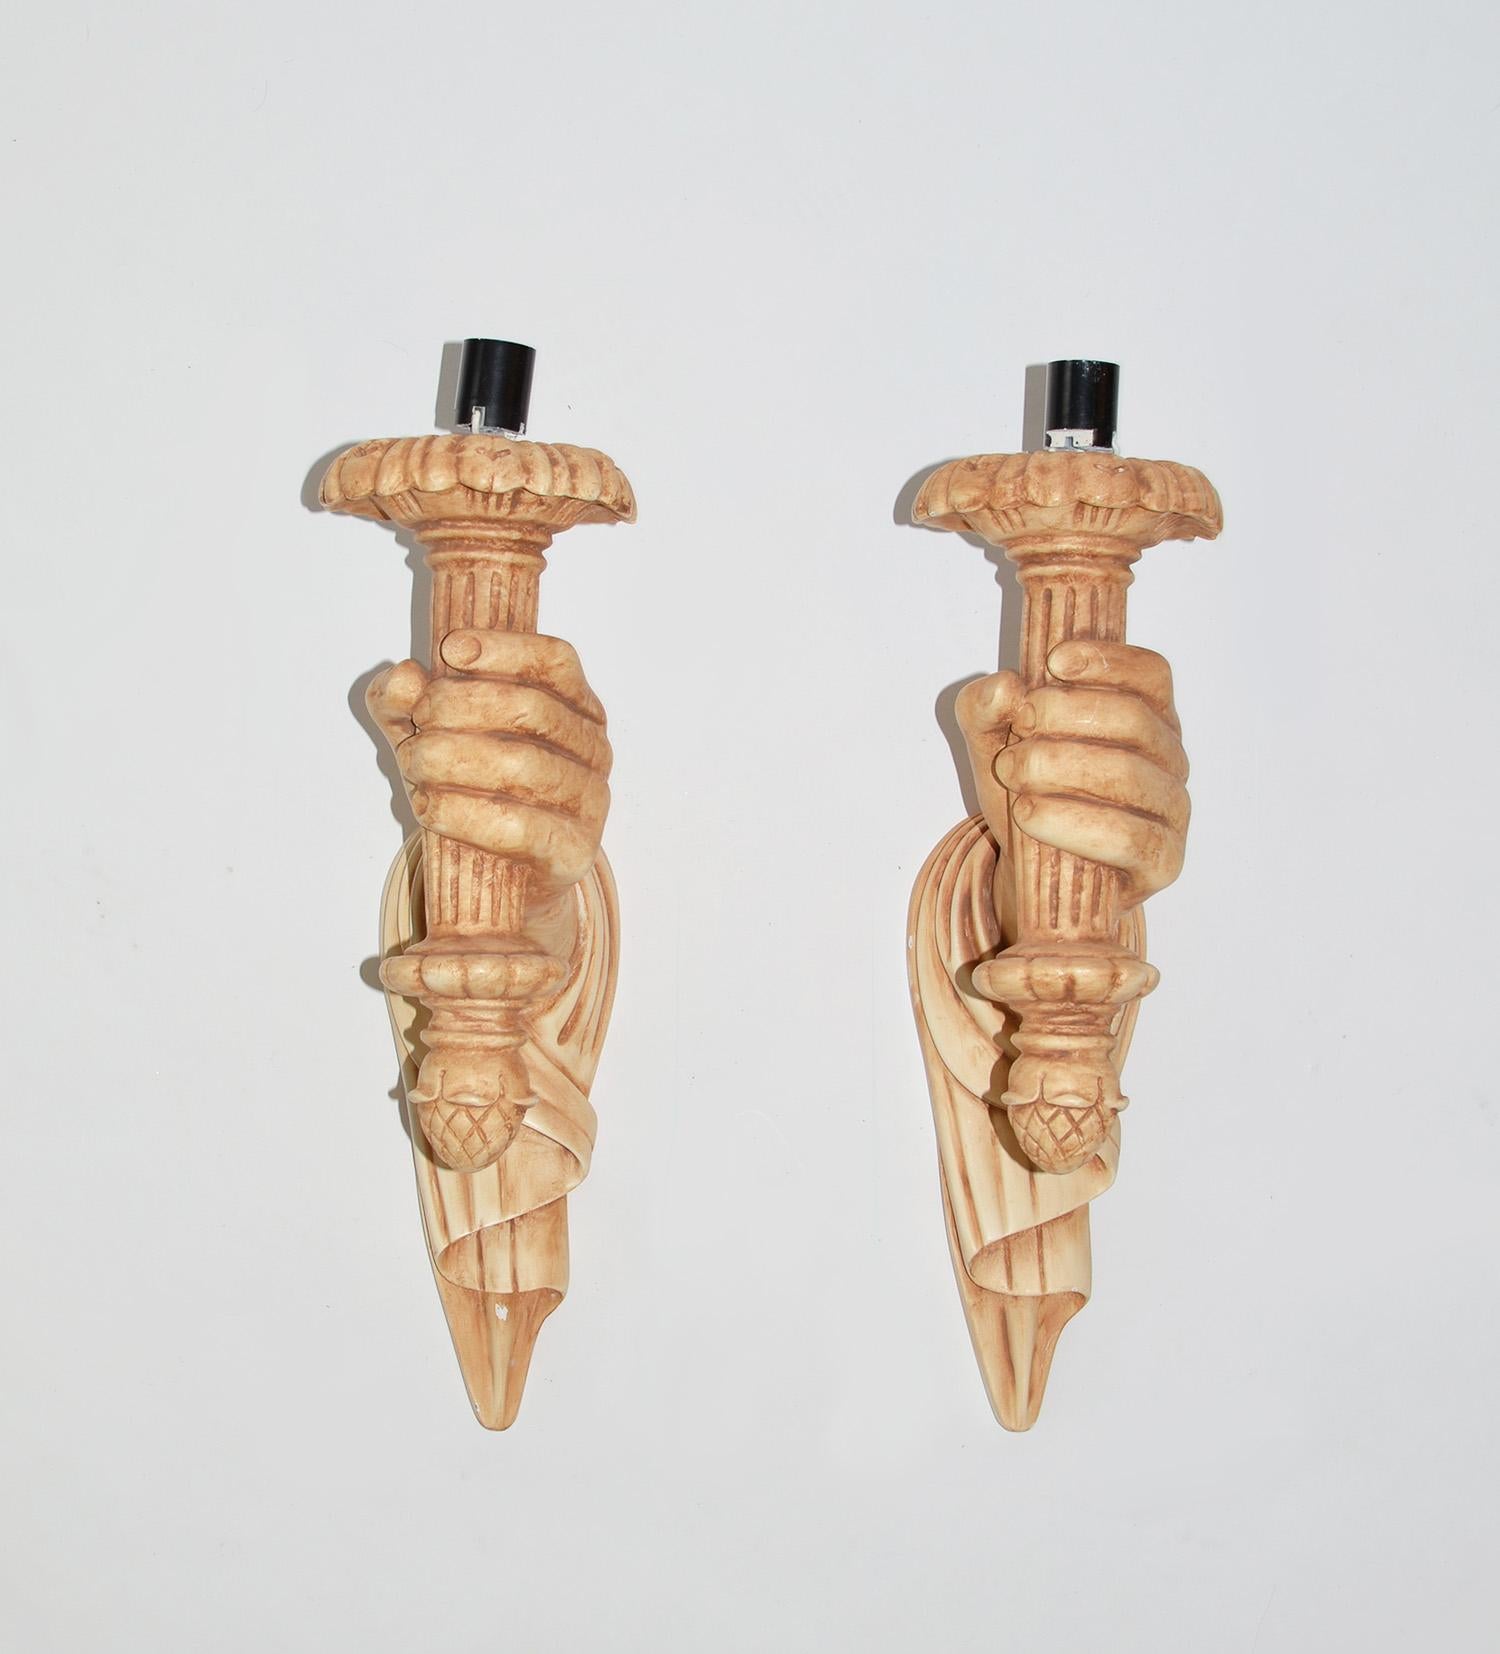 Pair of Plaster Hand & Torch Sconces by Sirmos Style of Jean-Michel Frank 1970s
Pair or set of rare faux painted plaster hand and torch sconces, lights or wall lamps by NY-based Sirmos. Labelled. No shades. Easily painted.  